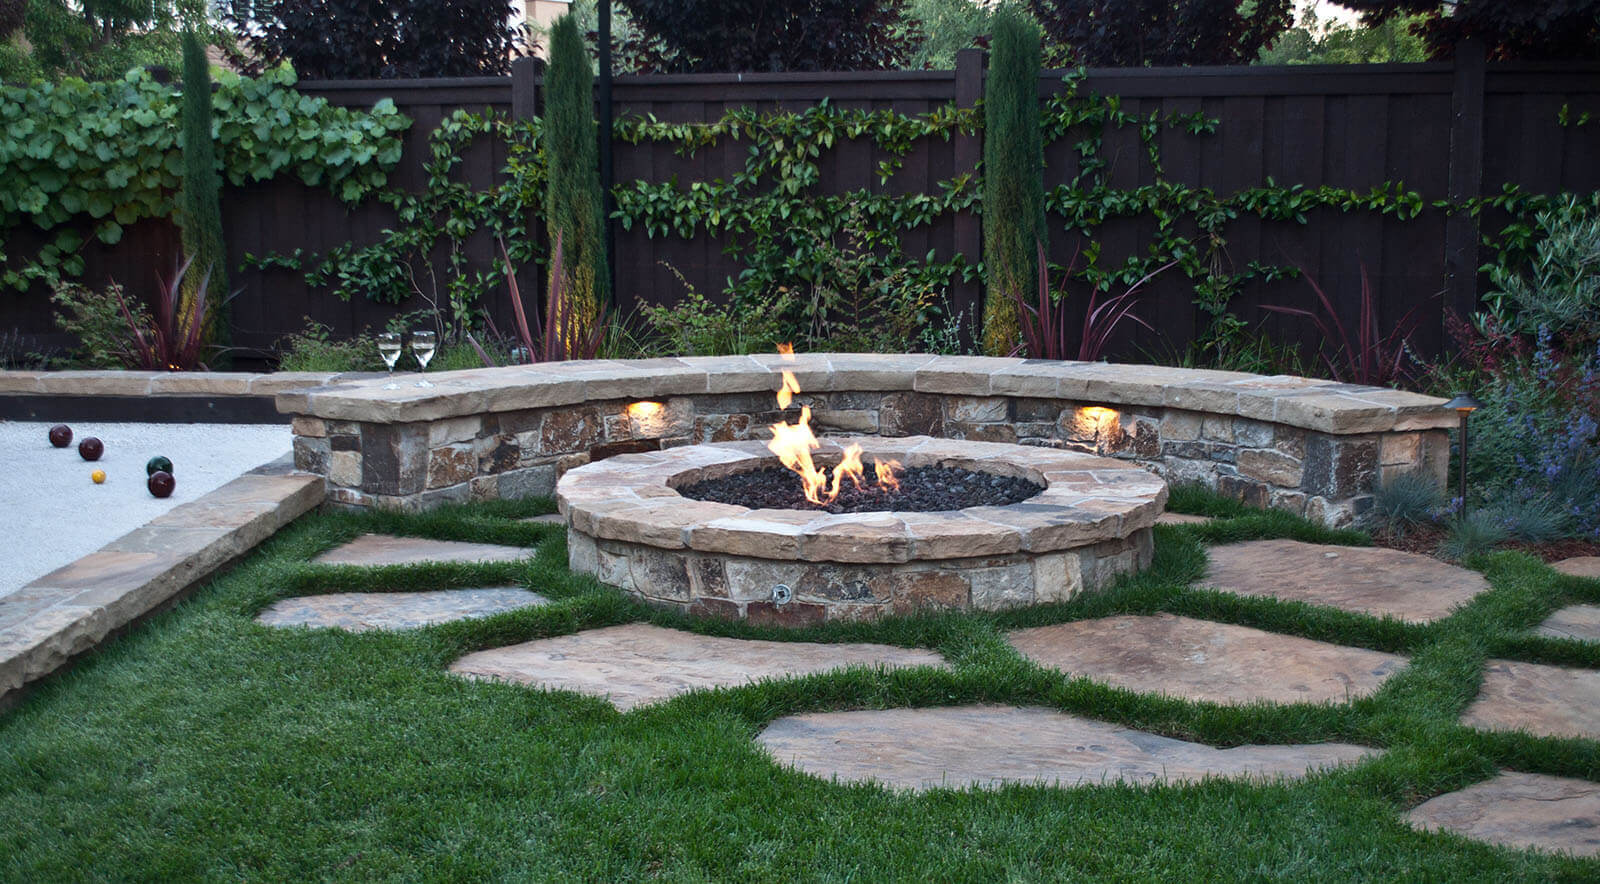 Low round stone fire pit with curved seat wall on casual flagstone patio set in lawn